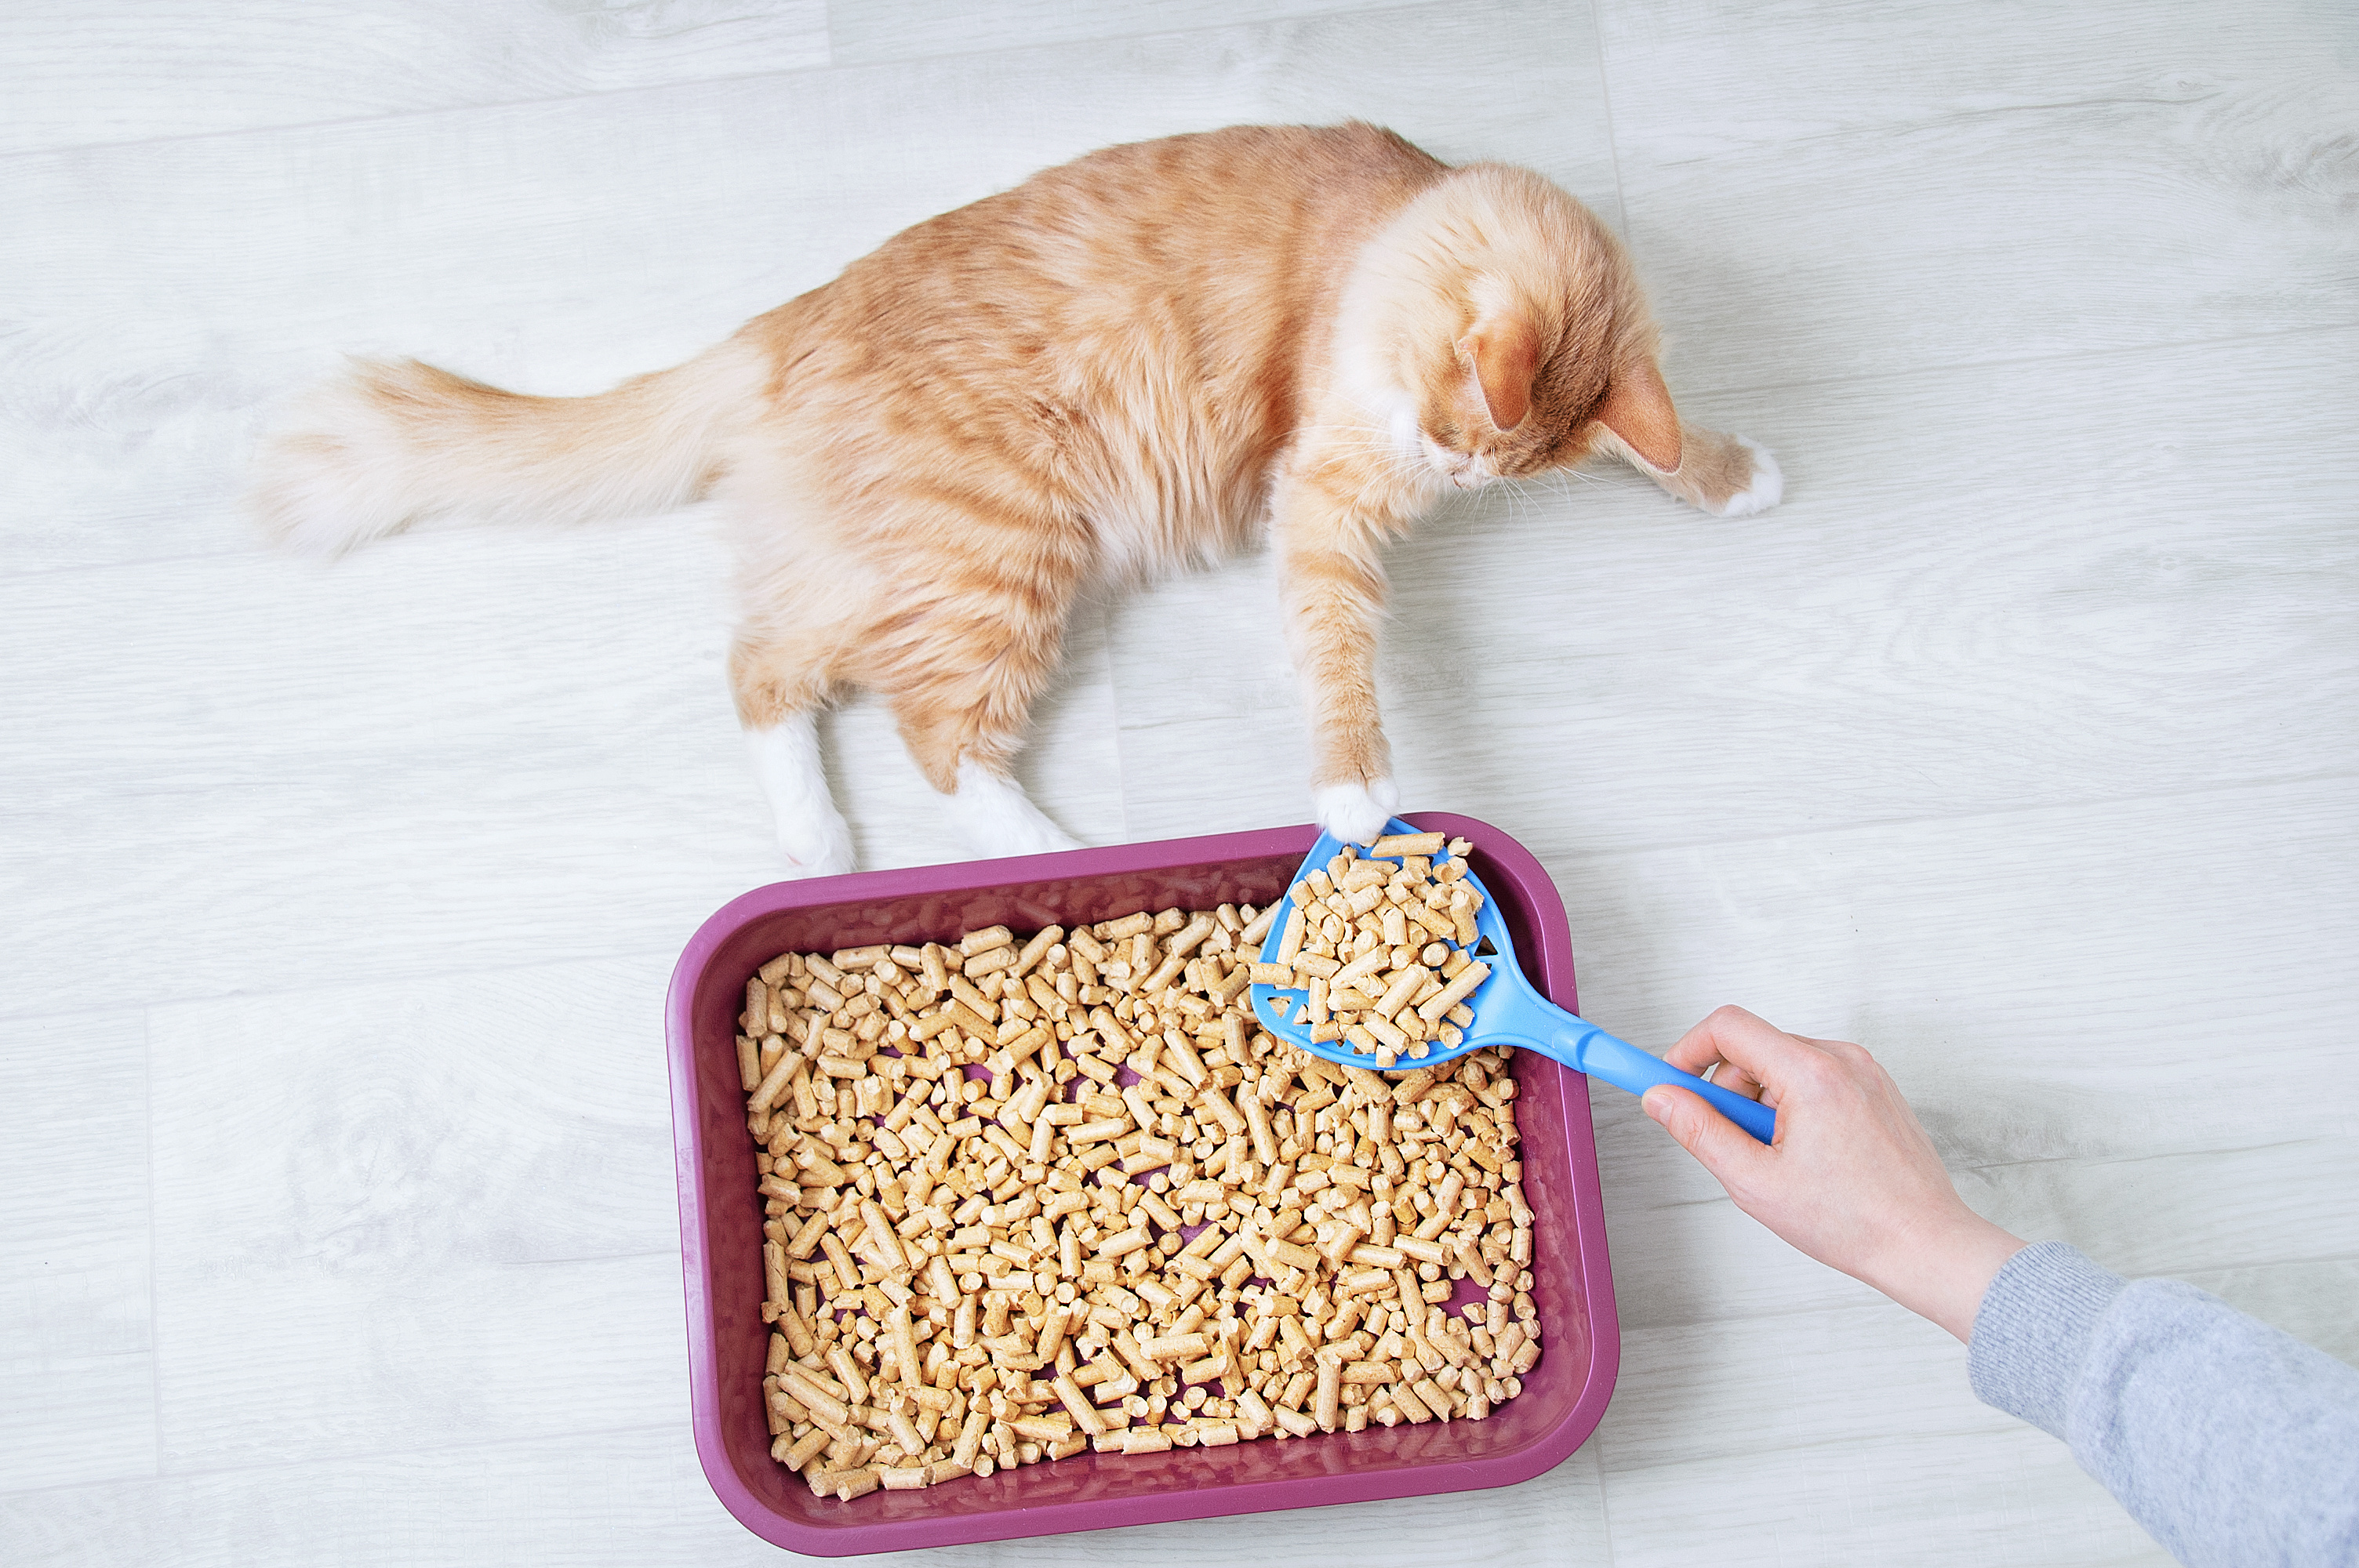 Litter Box 101: Tips for Keeping Your Cat's Bathroom Clean and Stress-Free